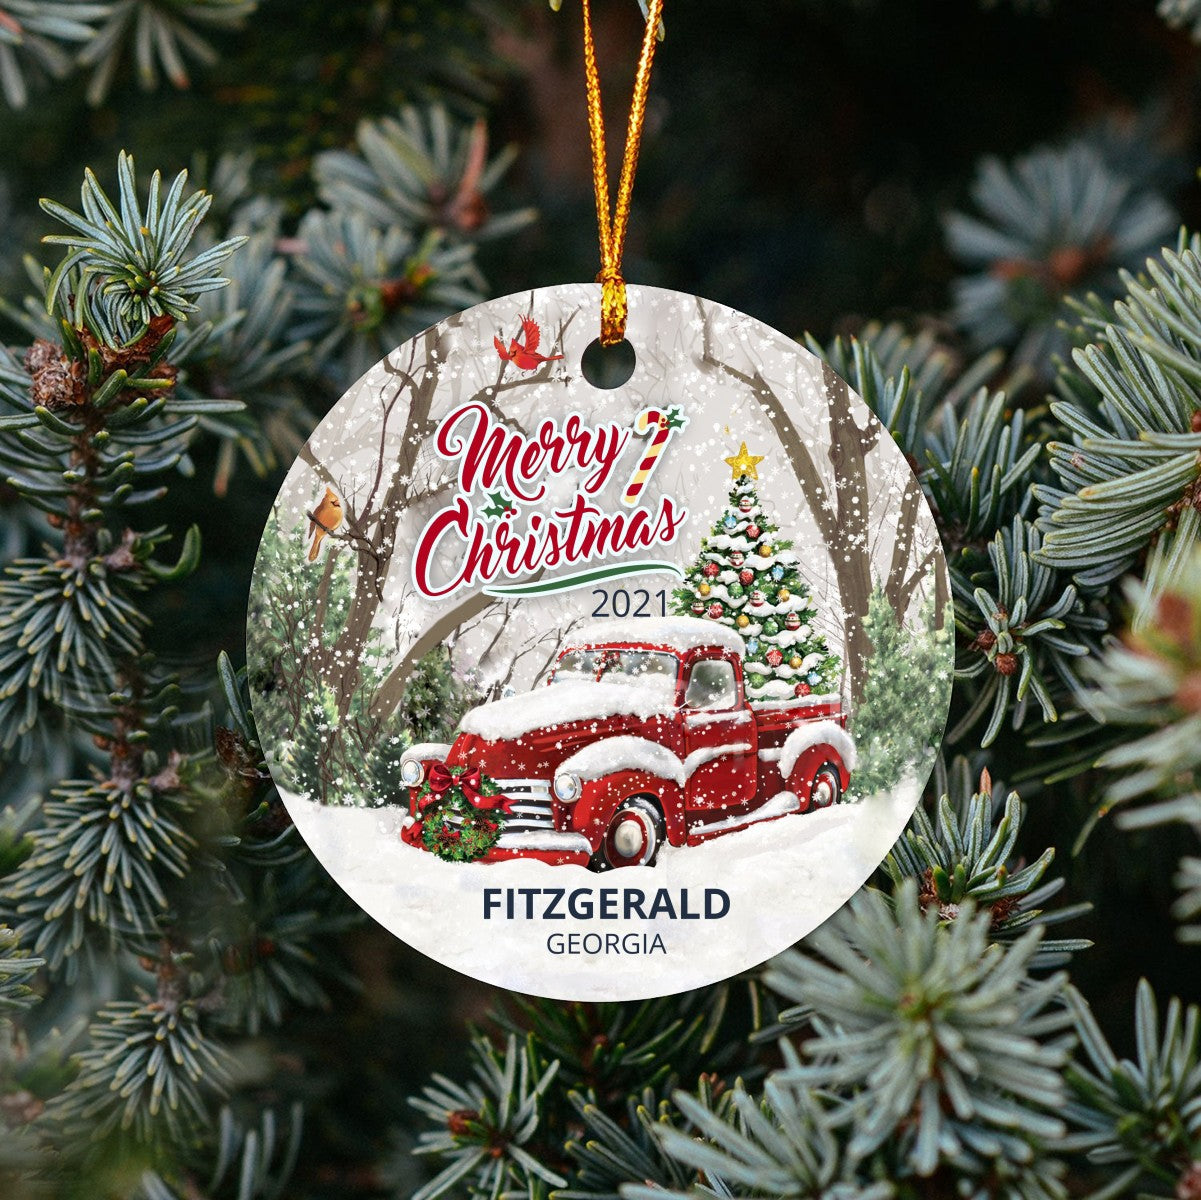 Christmas Tree Ornaments Fitzgerald - Ornament Customize With Name City And State Fitzgerald Georgia GA - Red Truck Xmas Ornaments 3'' Plastic Gift For Family, Friend And Housewarming